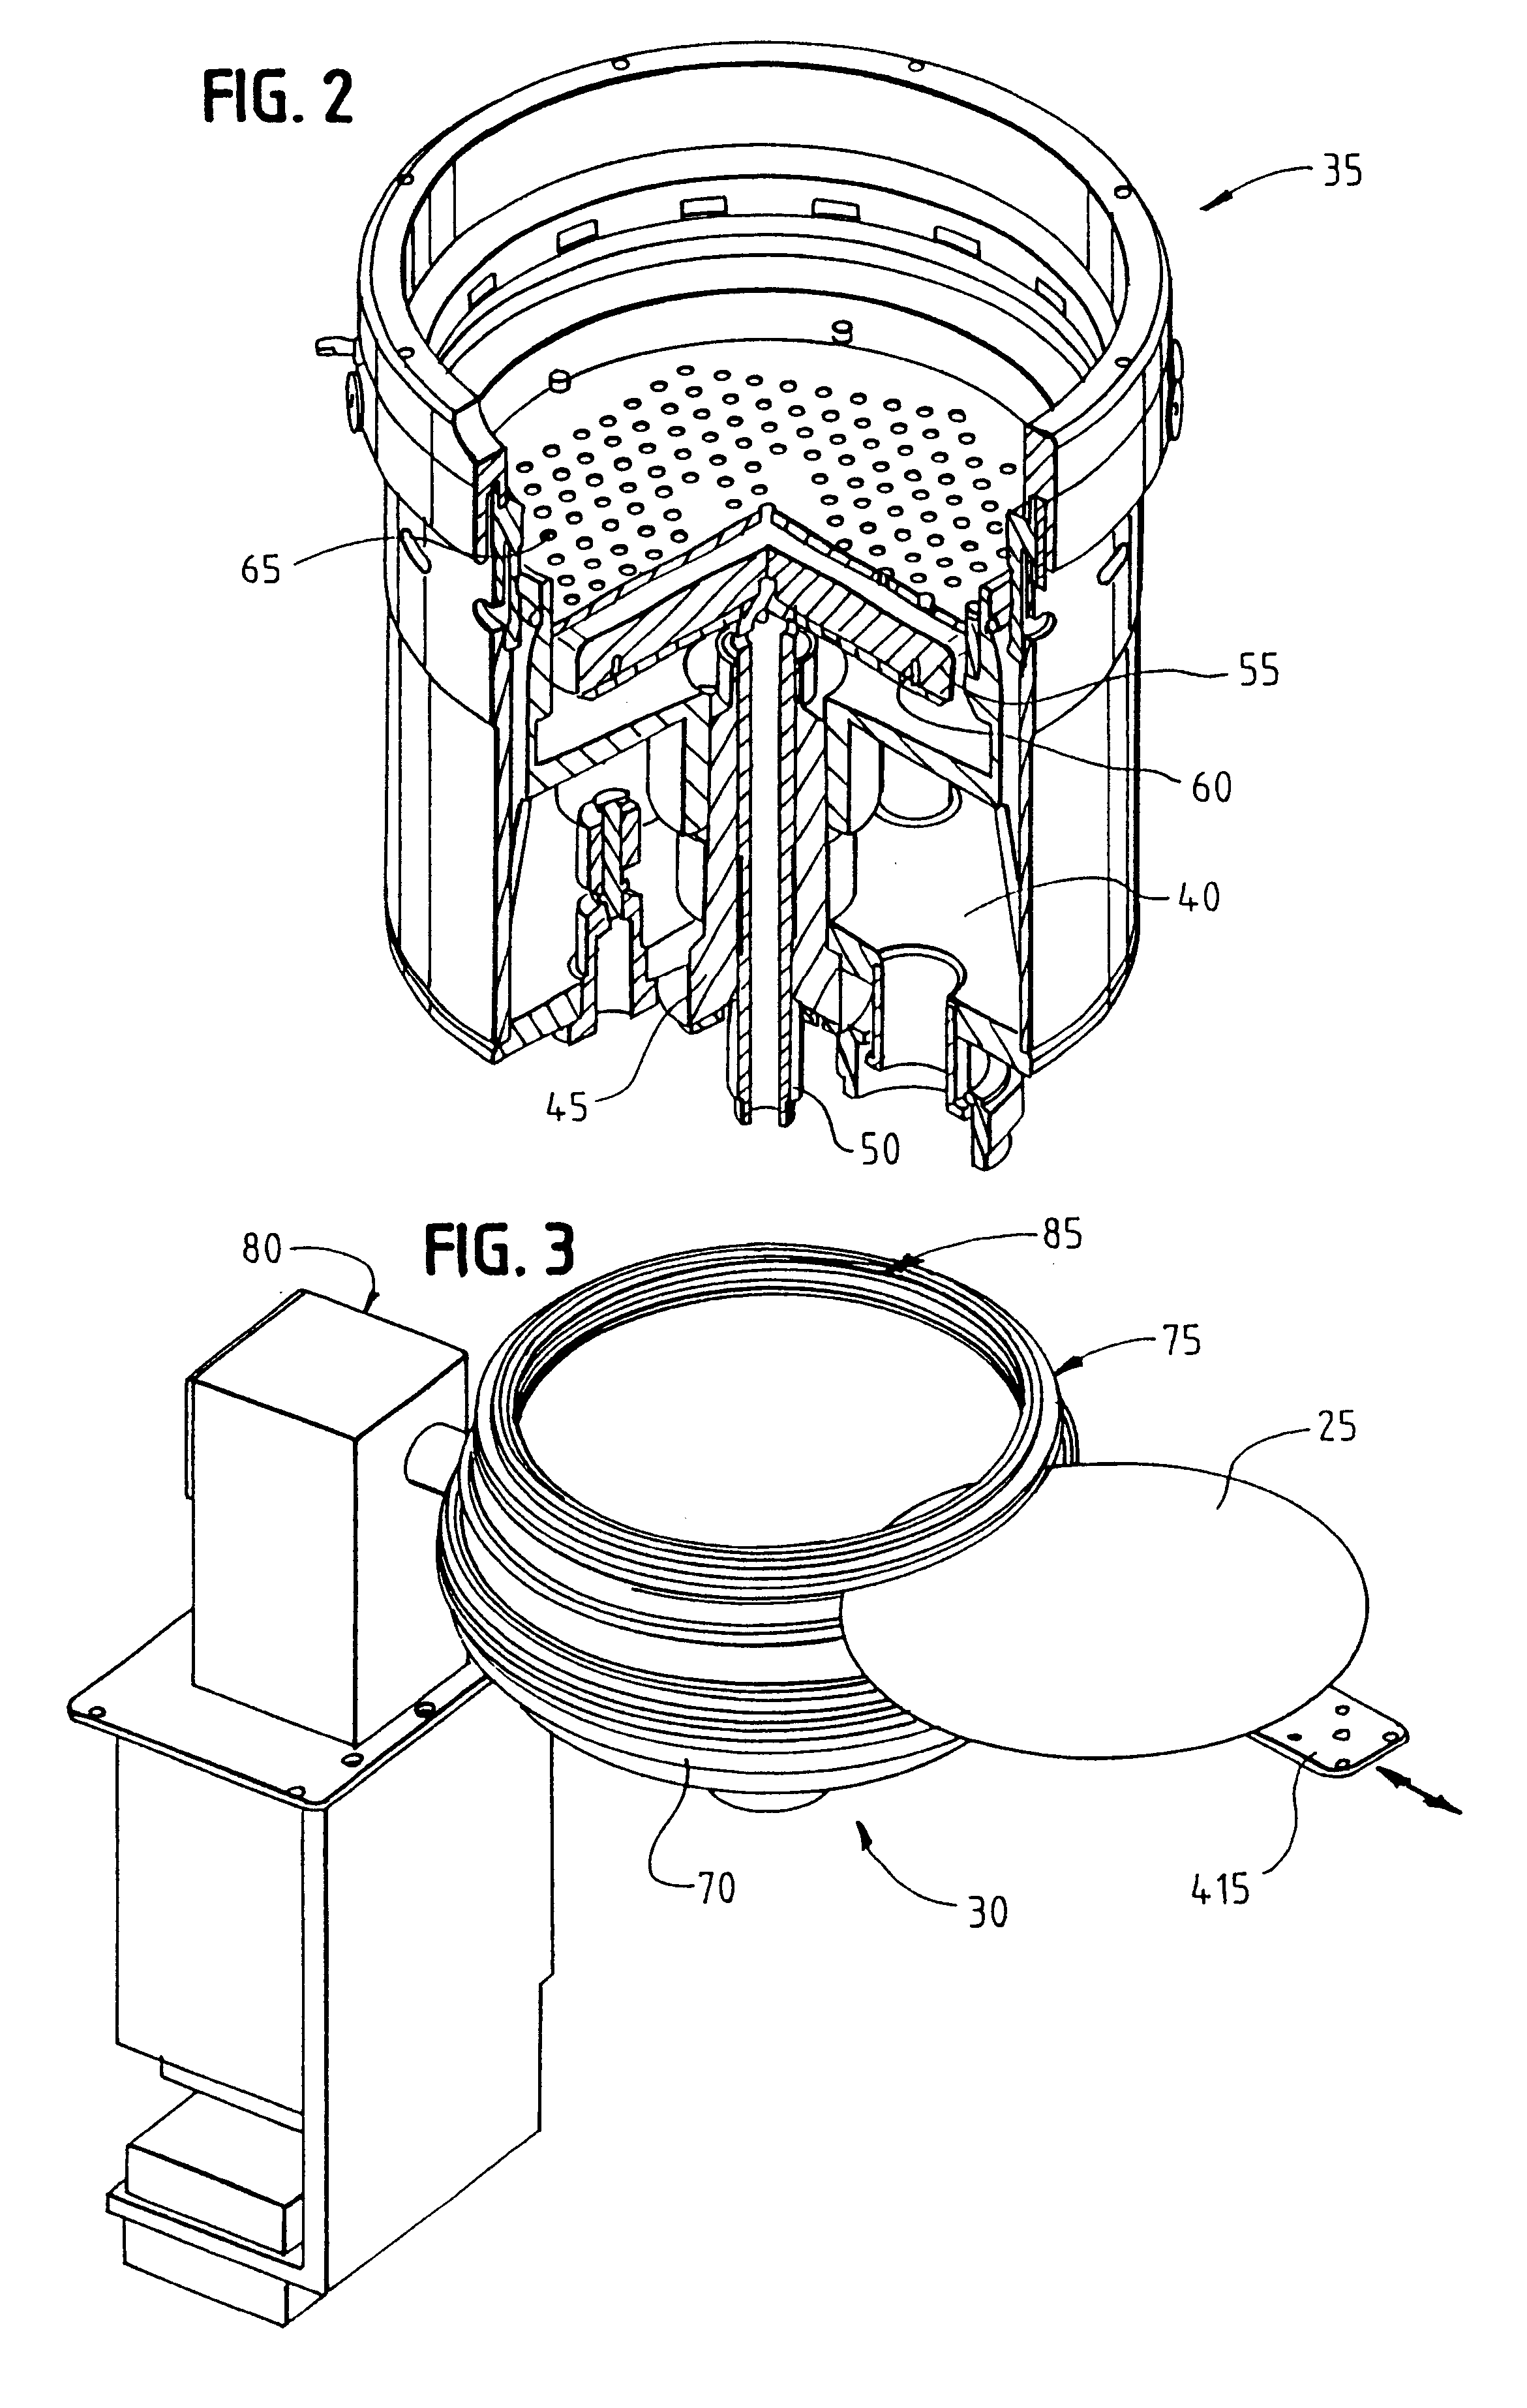 Apparatus for high deposition rate solder electroplating on a microelectronic workpiece